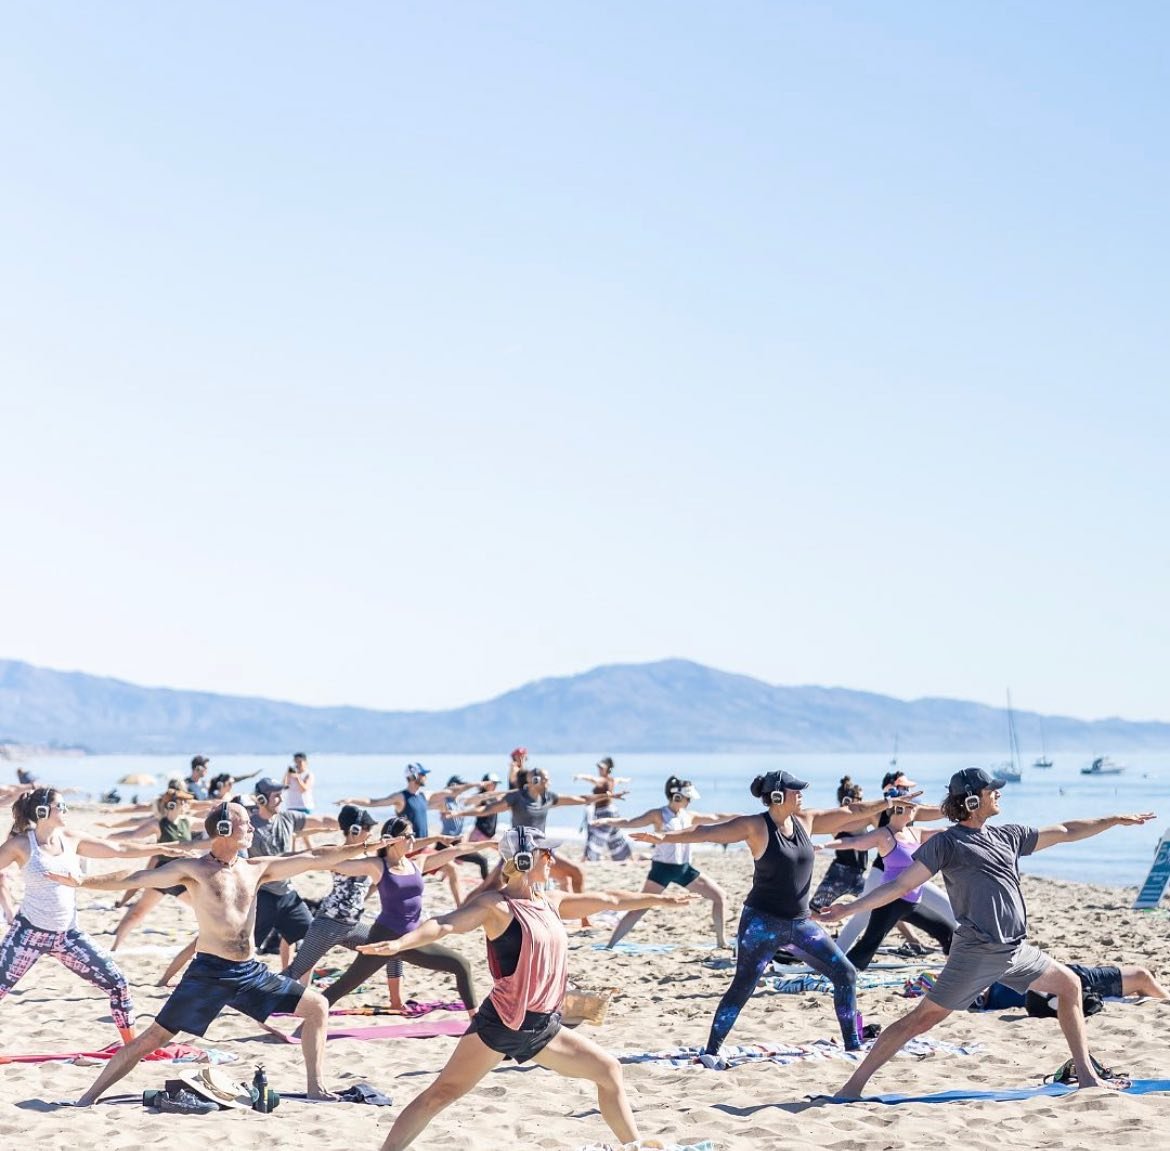 Get outside for Beach Yoga this Saturday &amp; Sunday at 10am! ☀️ 

View Class Schedule &amp; Register Online via link in bio or at www.SantaBarbaraBeachYoga.com 🐚